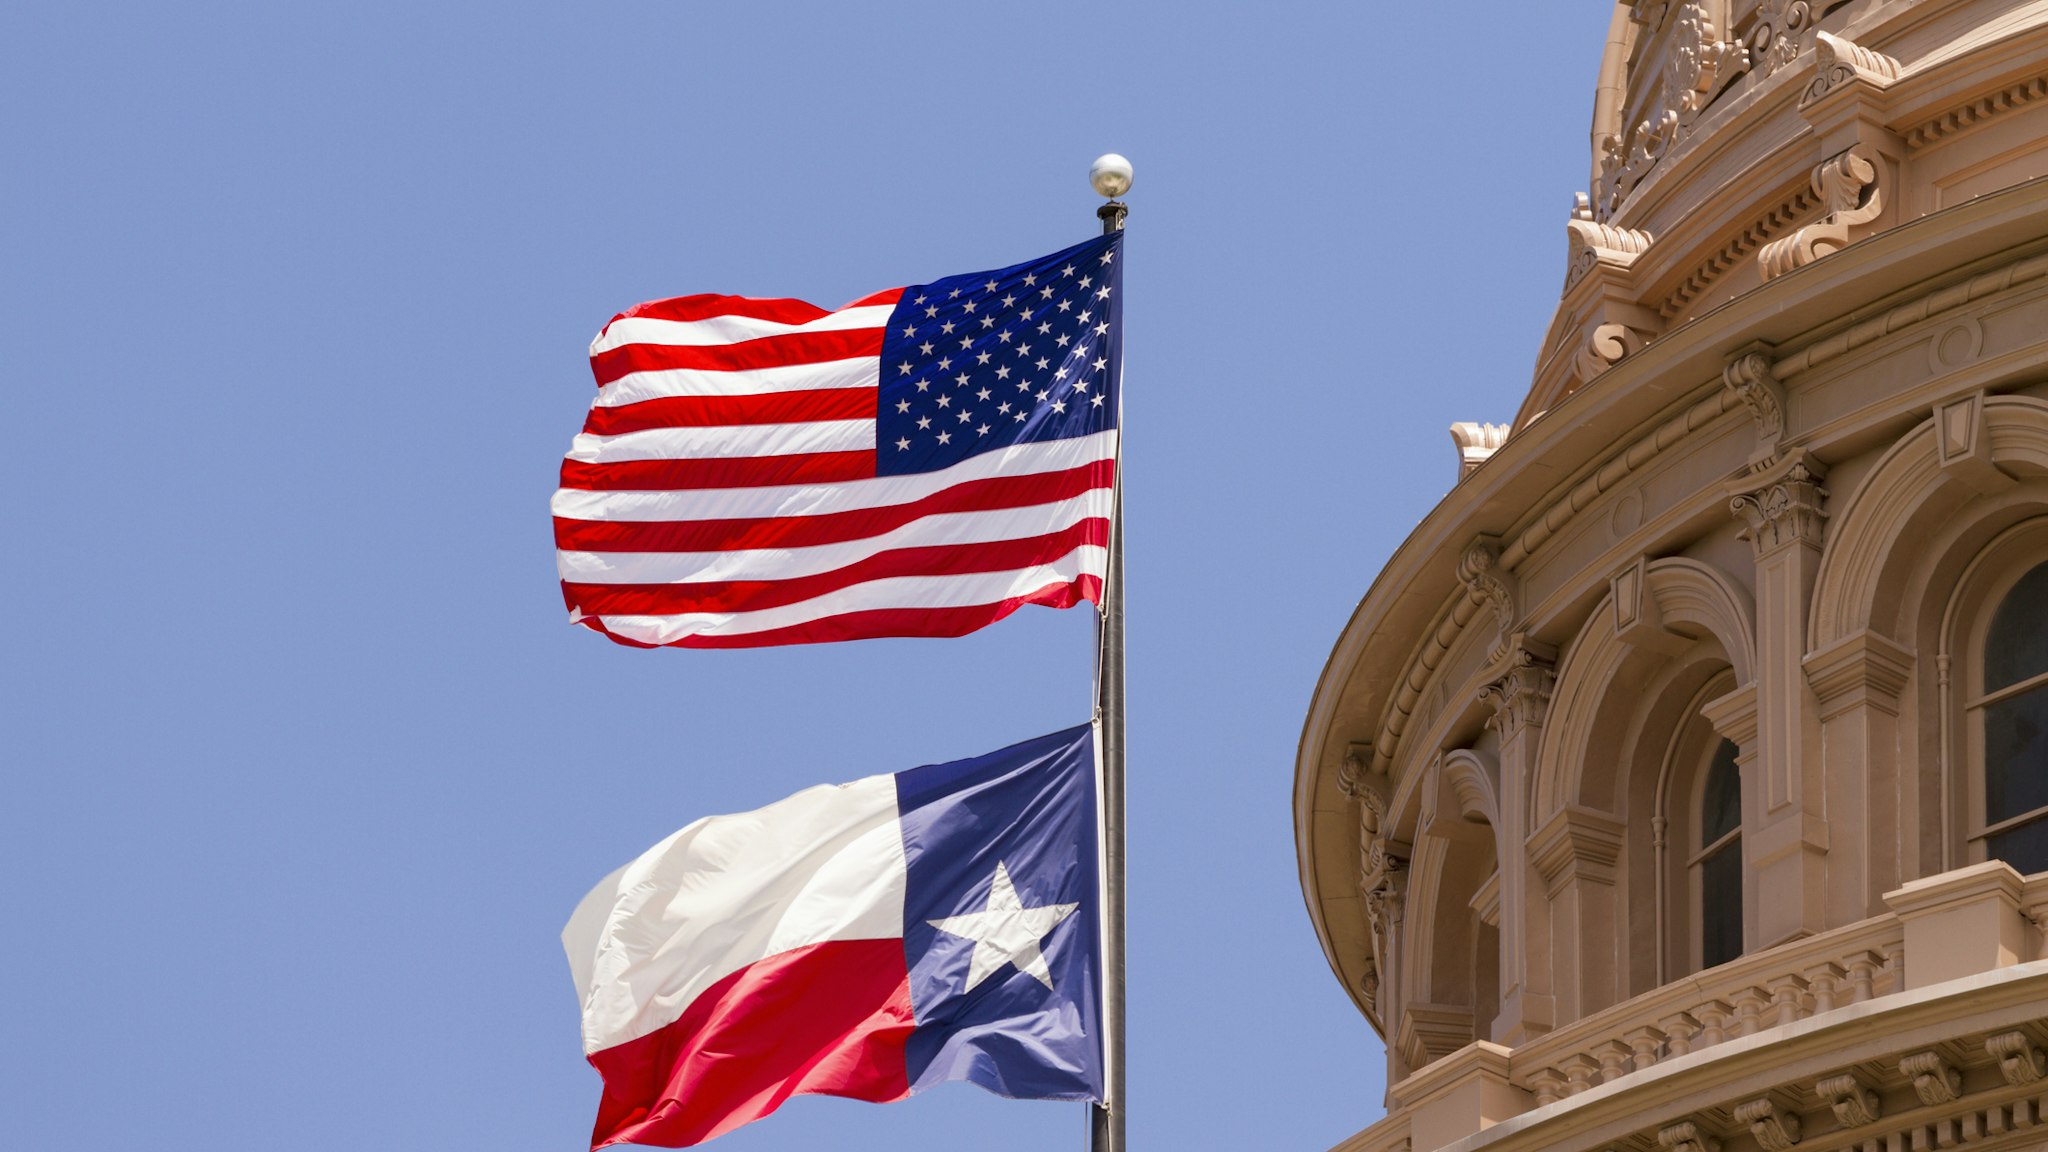 US and Texas flags flying over Texas State Capitol building, Austin, USA